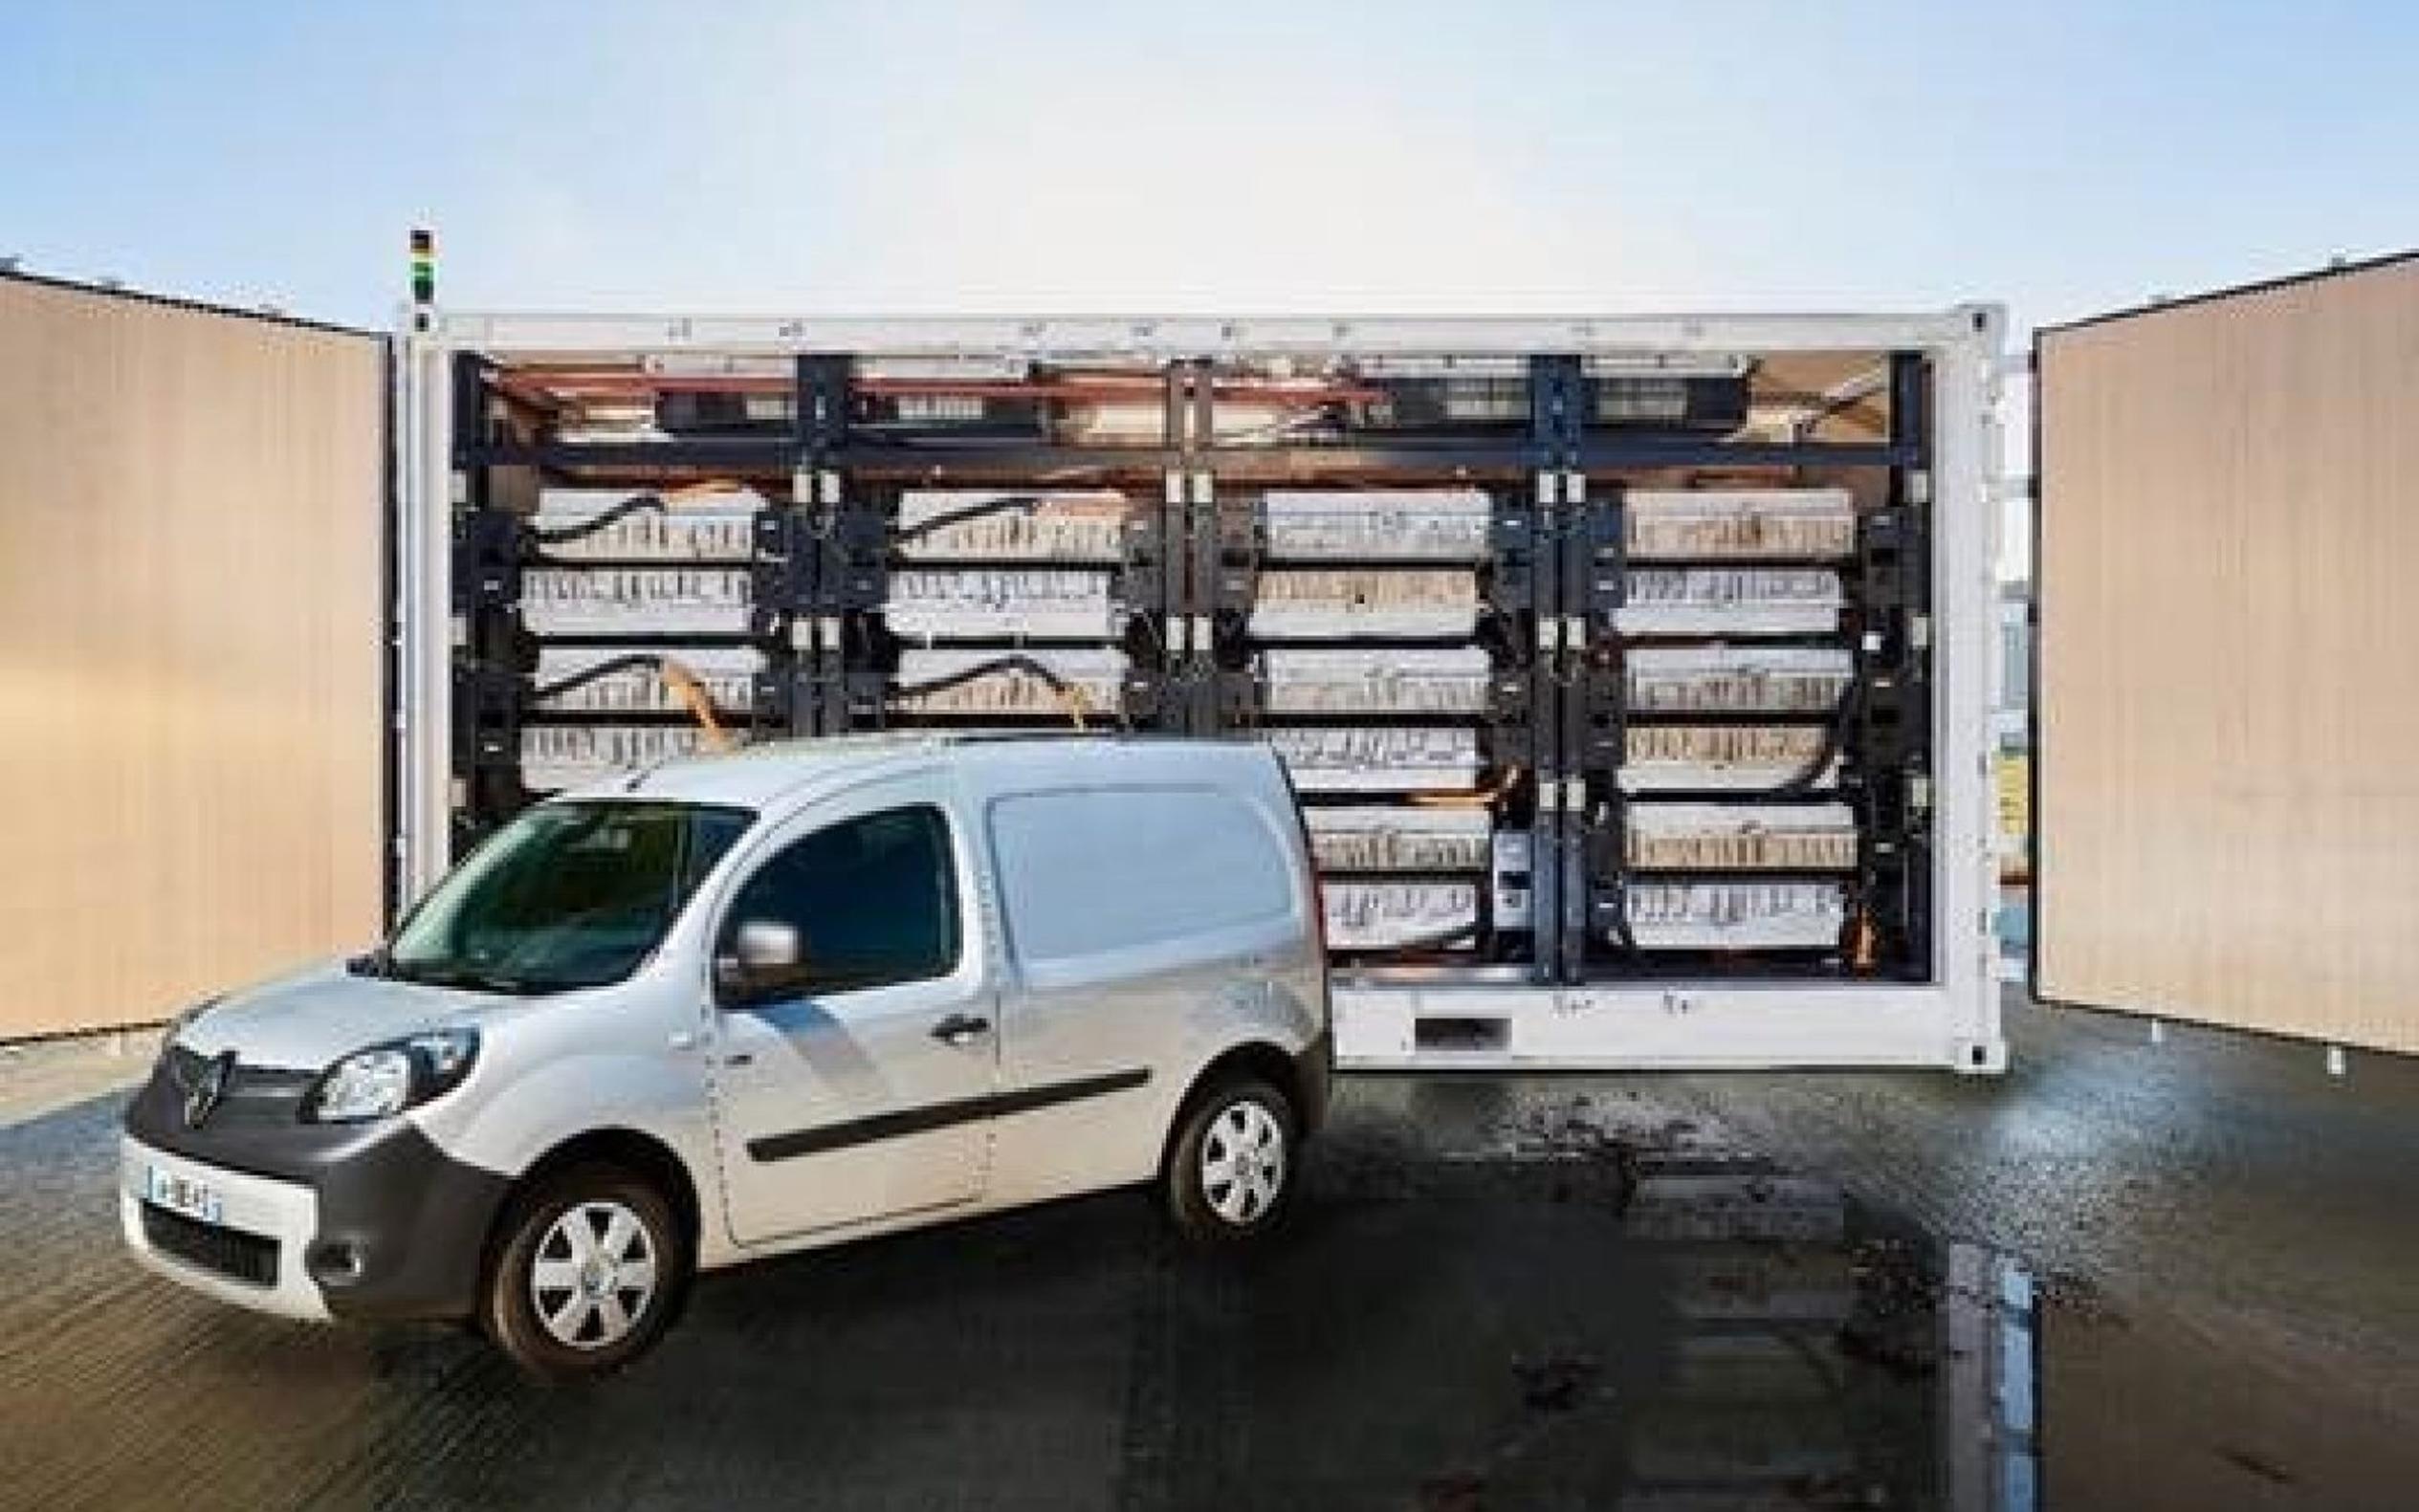 A Connected Energy BESS system with Renault Kangoo